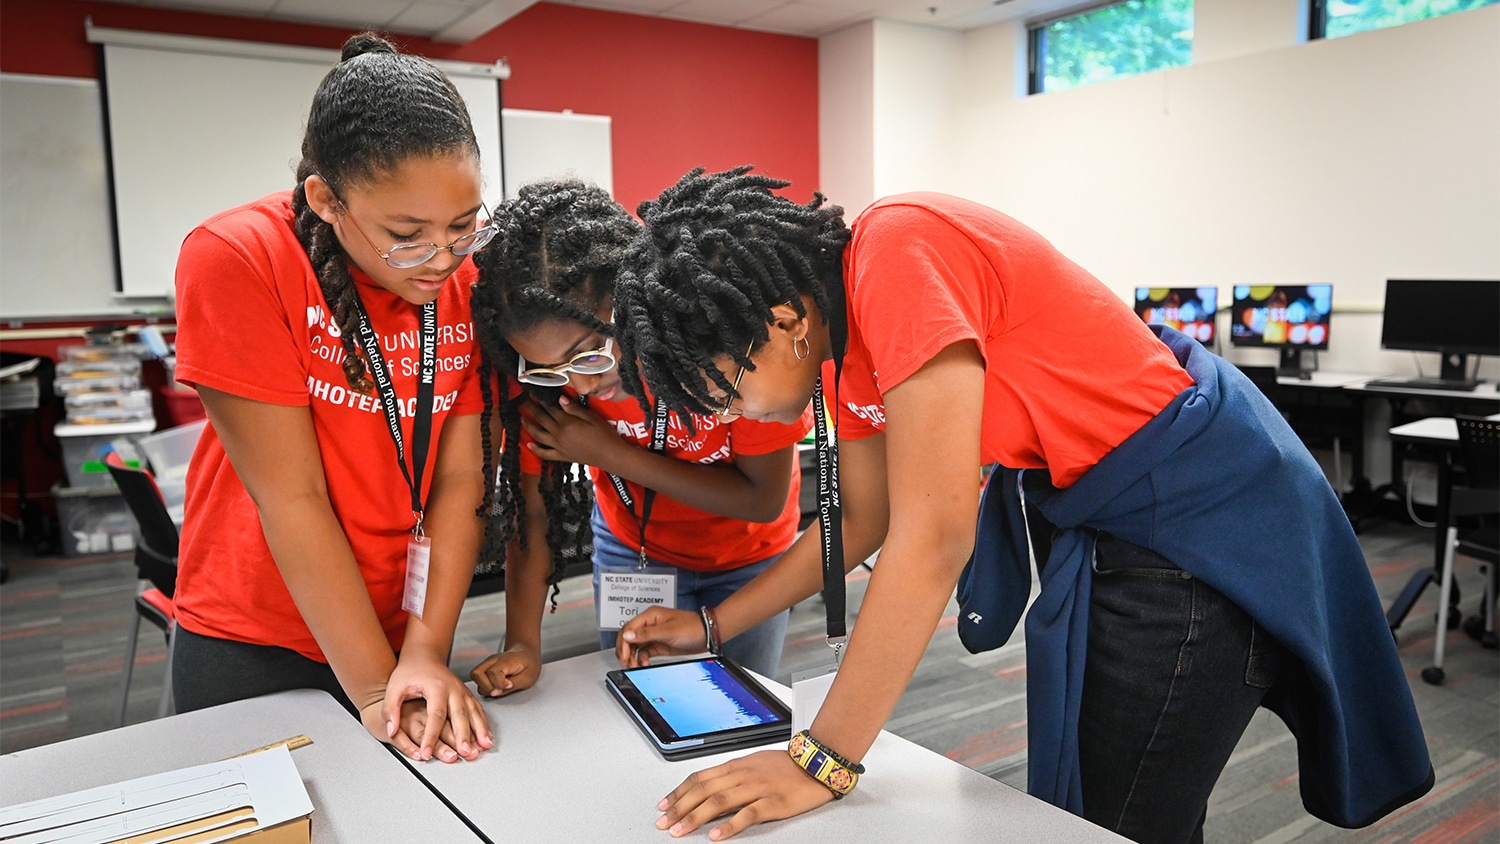 Three female students huddle around a tablet on a white table during an IMHOTEP Academy event at The Science House.